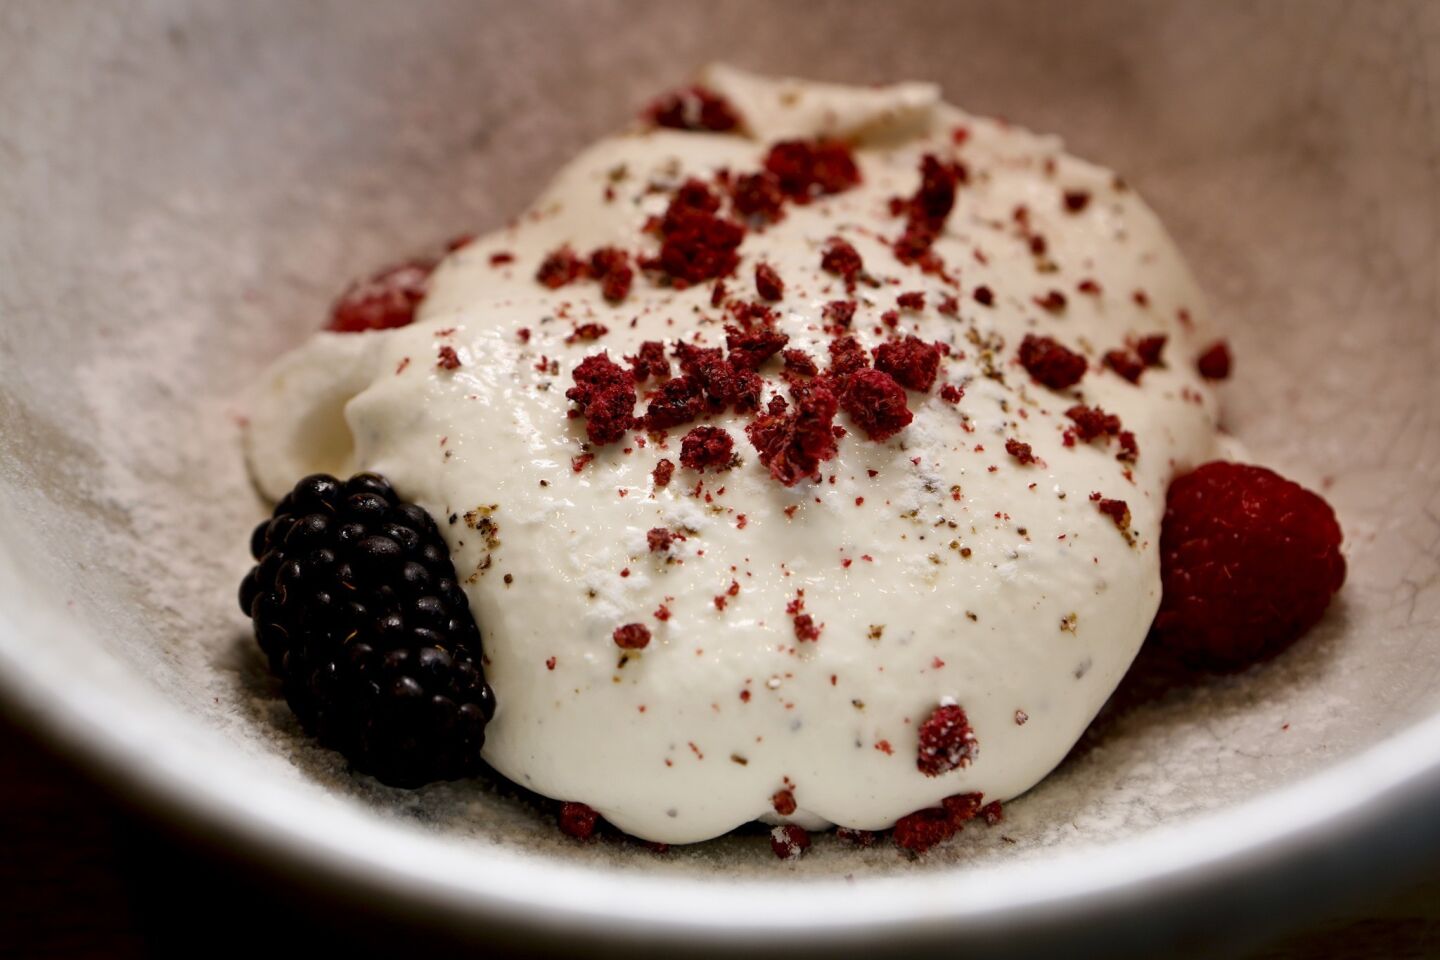 Dessert usually involves some kind of homemade ice cream. Here, tonka bean ice cream is served with berries, hibiscus and Szechwan peppercorn.